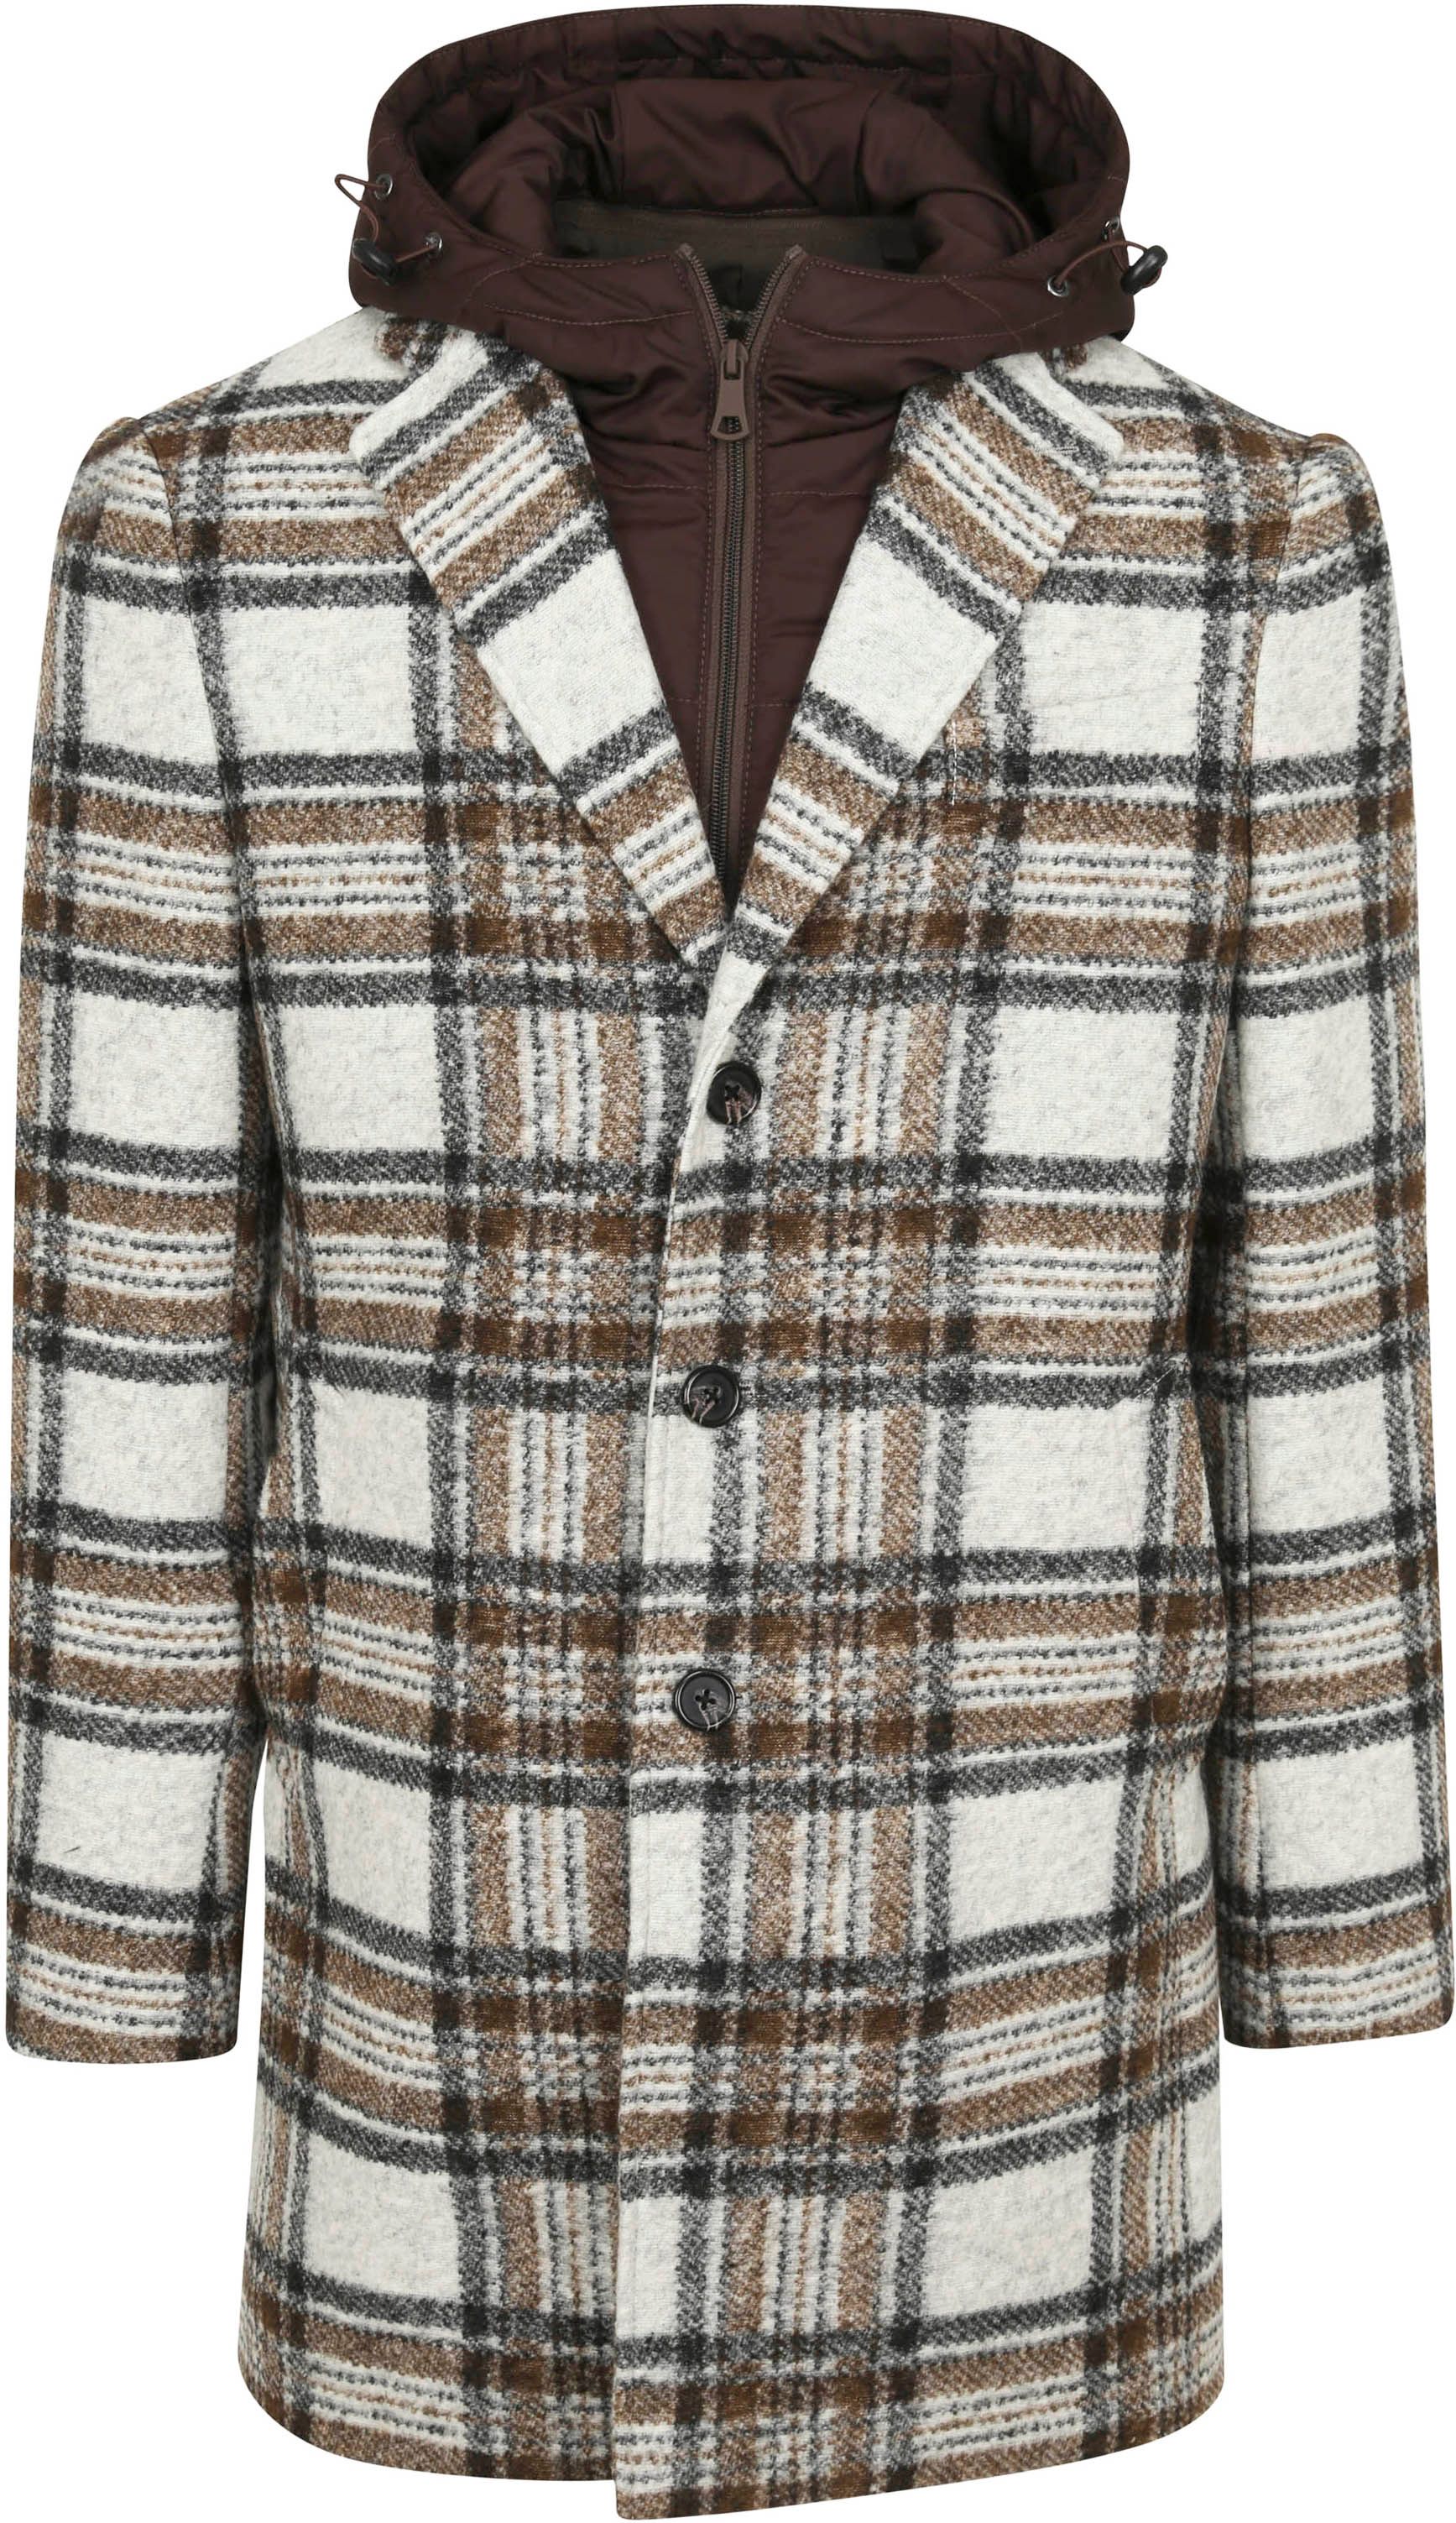 Suitable Coat Checkered Brown Grey size 38-R